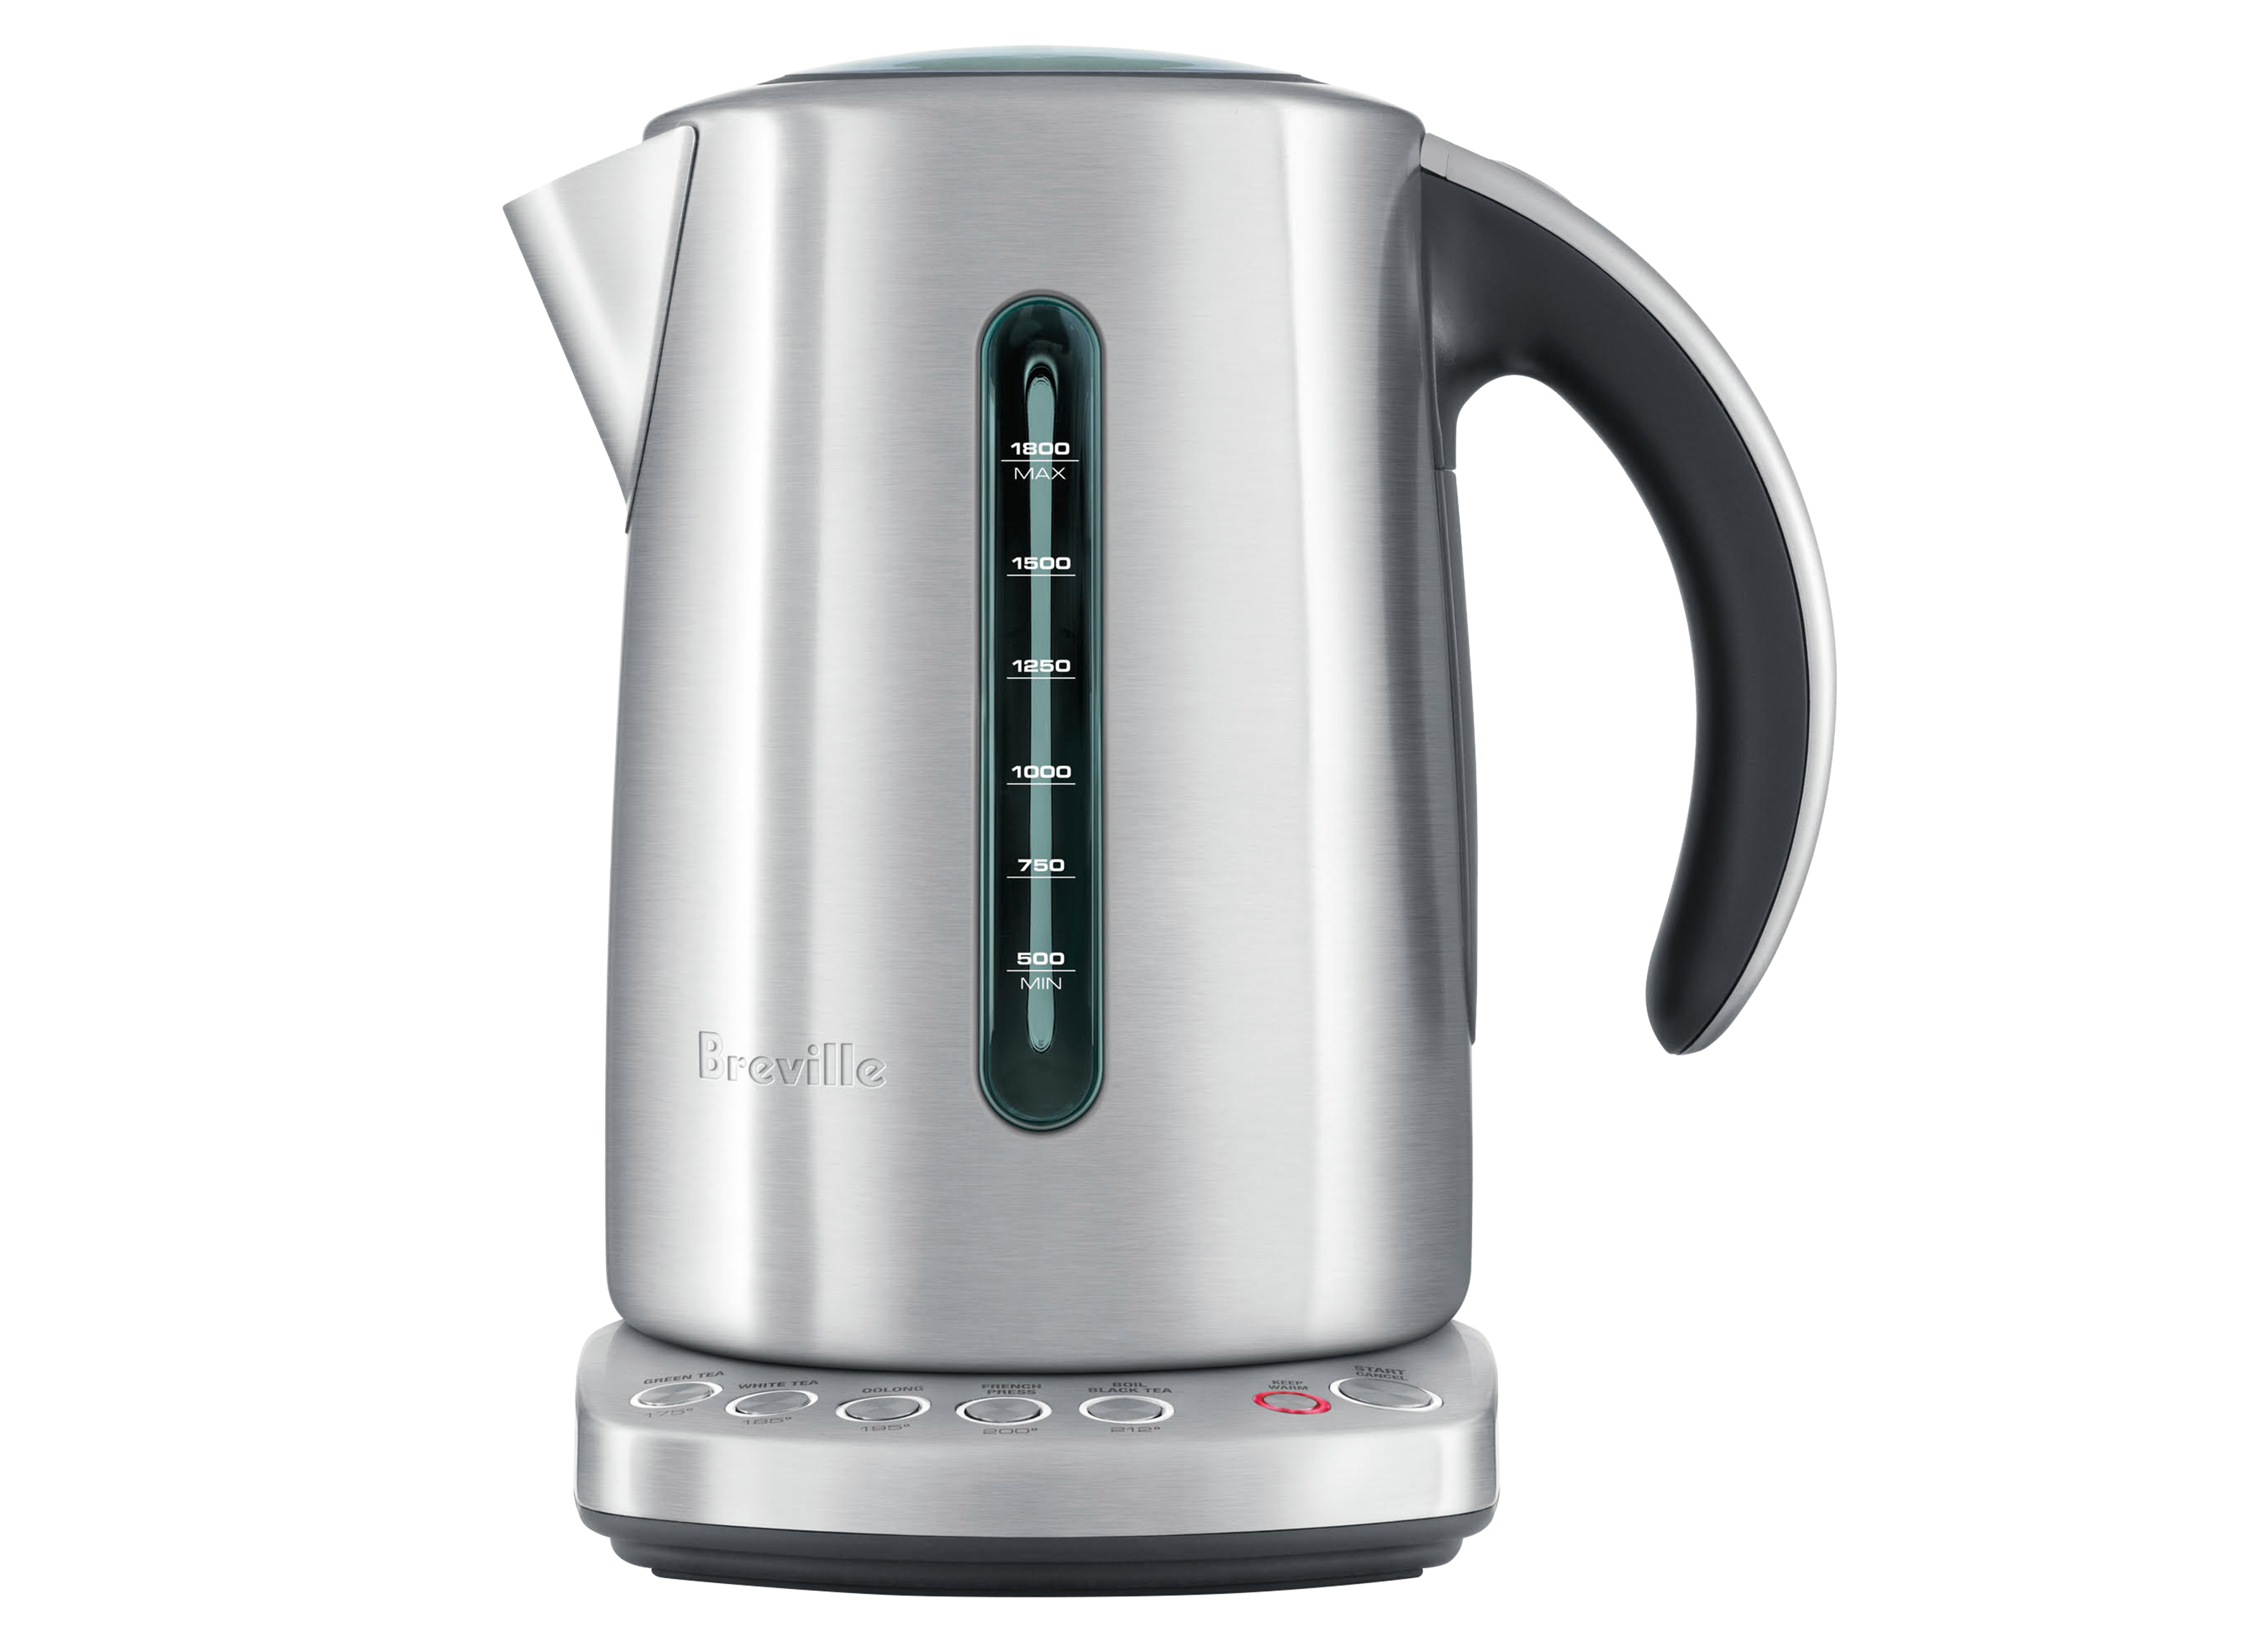 https://crdms.images.consumerreports.org/prod/products/cr/models/399356-electric-kettles-breville-iq-kettle-10007049.png